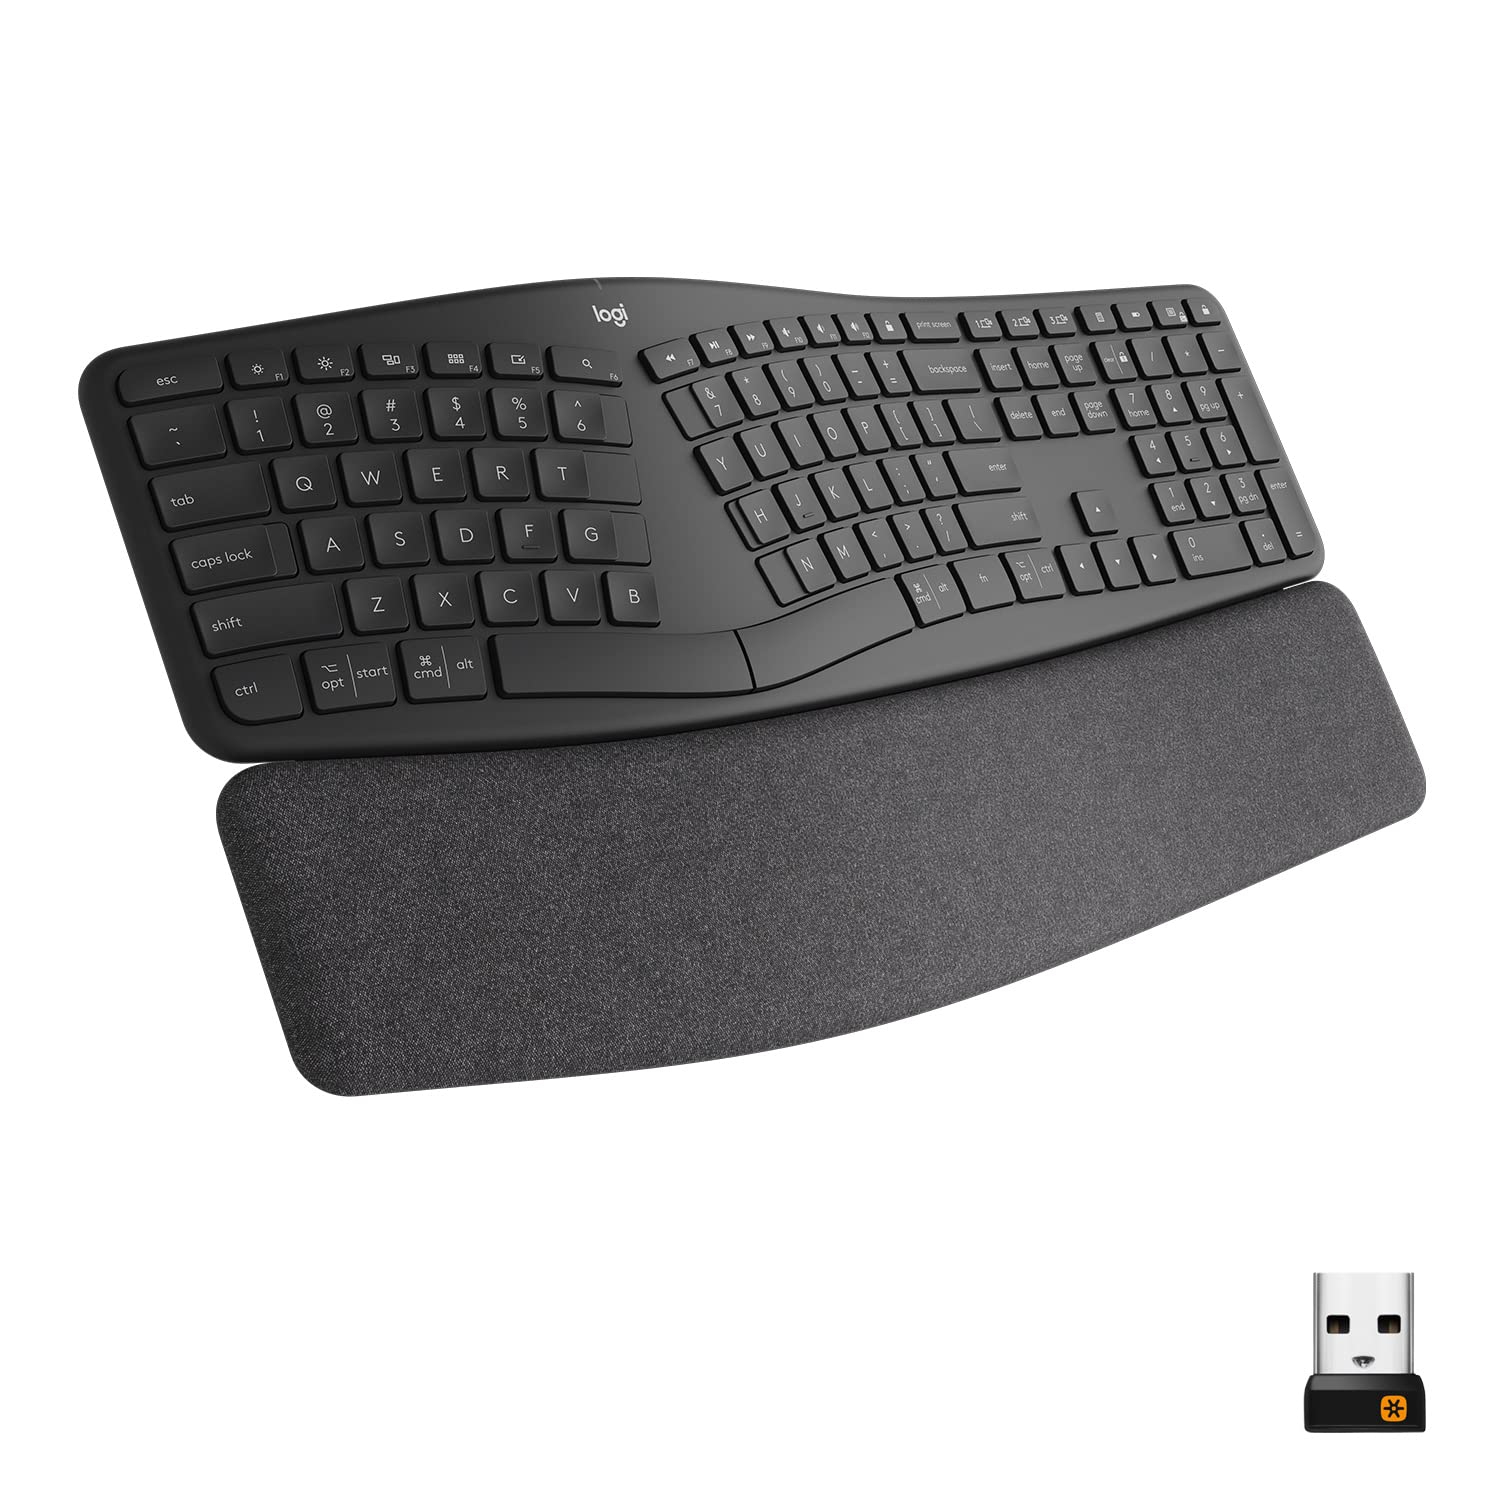 Logitech ERGO K860 Wireless Ergonomic Keyboard - Split Keyboard, Wrist Rest, Natural Typing, Stain-Resistant Fabric, Bluetooth and USB Connectivity, Compatible